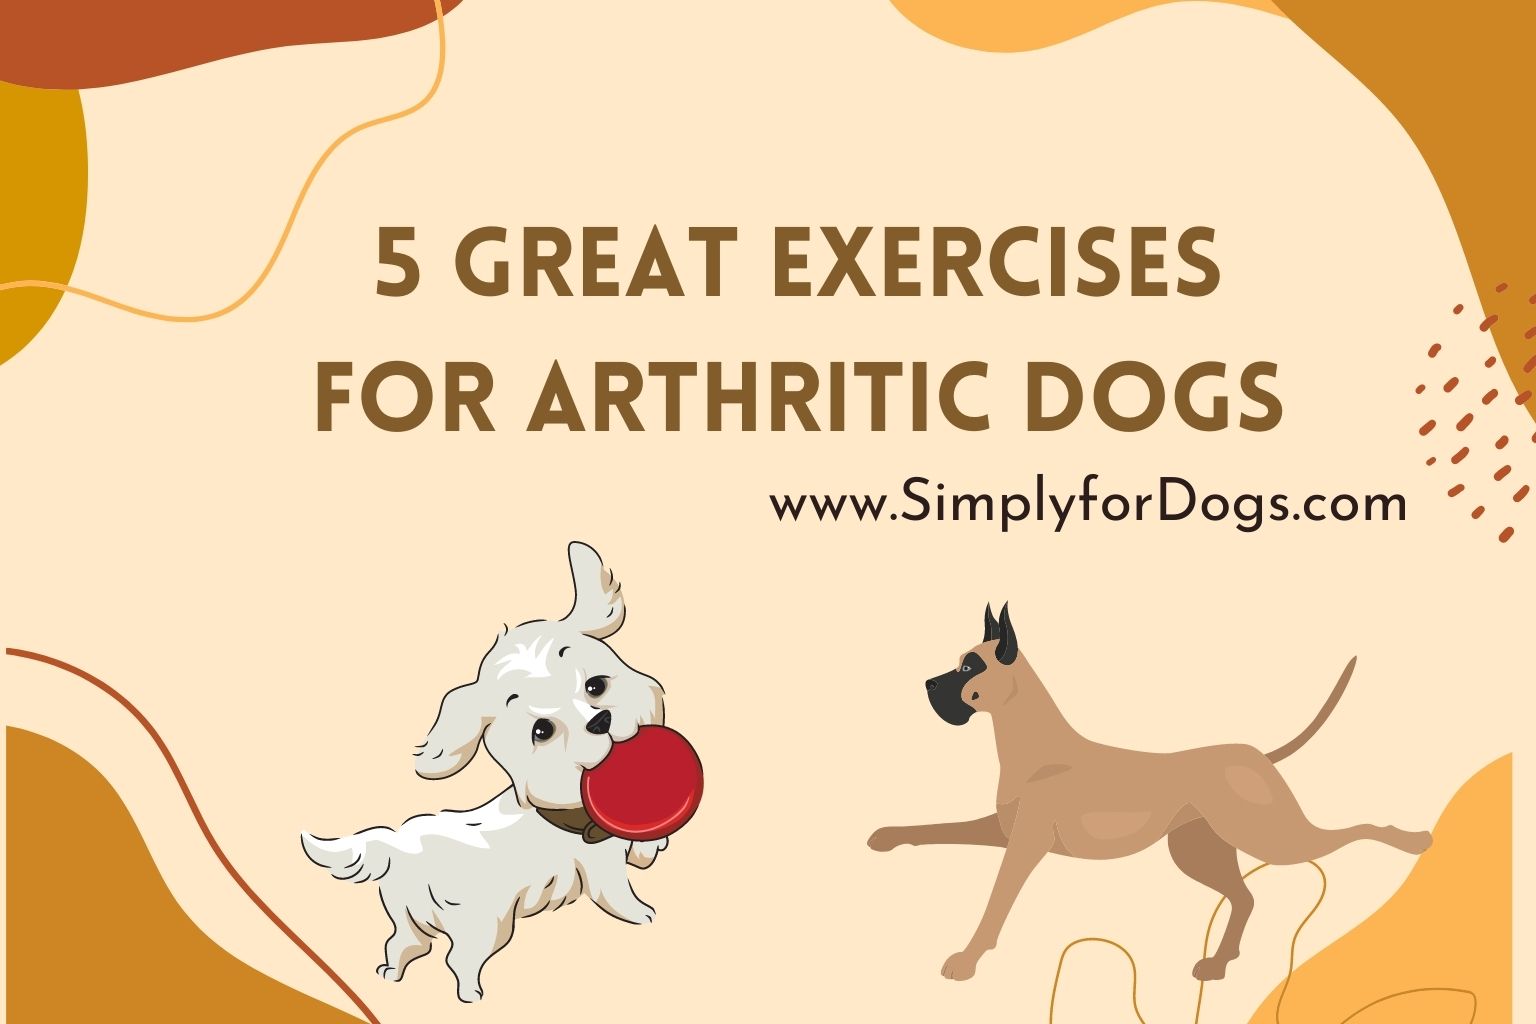 5 Great Exercises for Arthritic Dogs